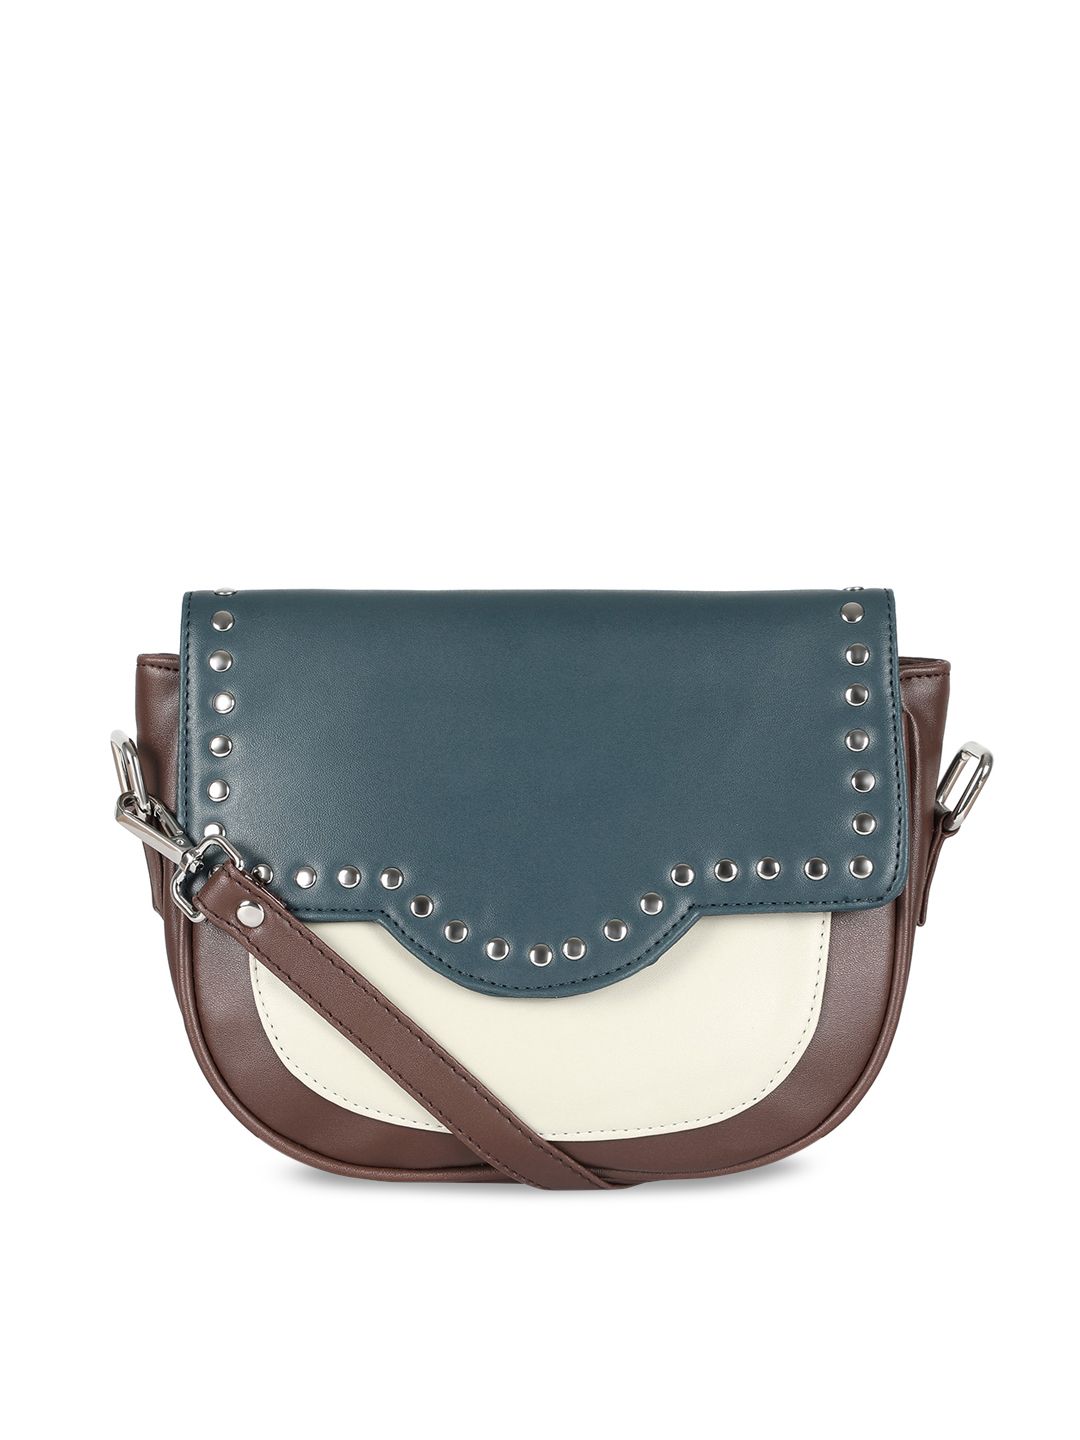 Toteteca Teal Coloured and Beige Colourblocked PU Half Moon Sling Bag Price in India